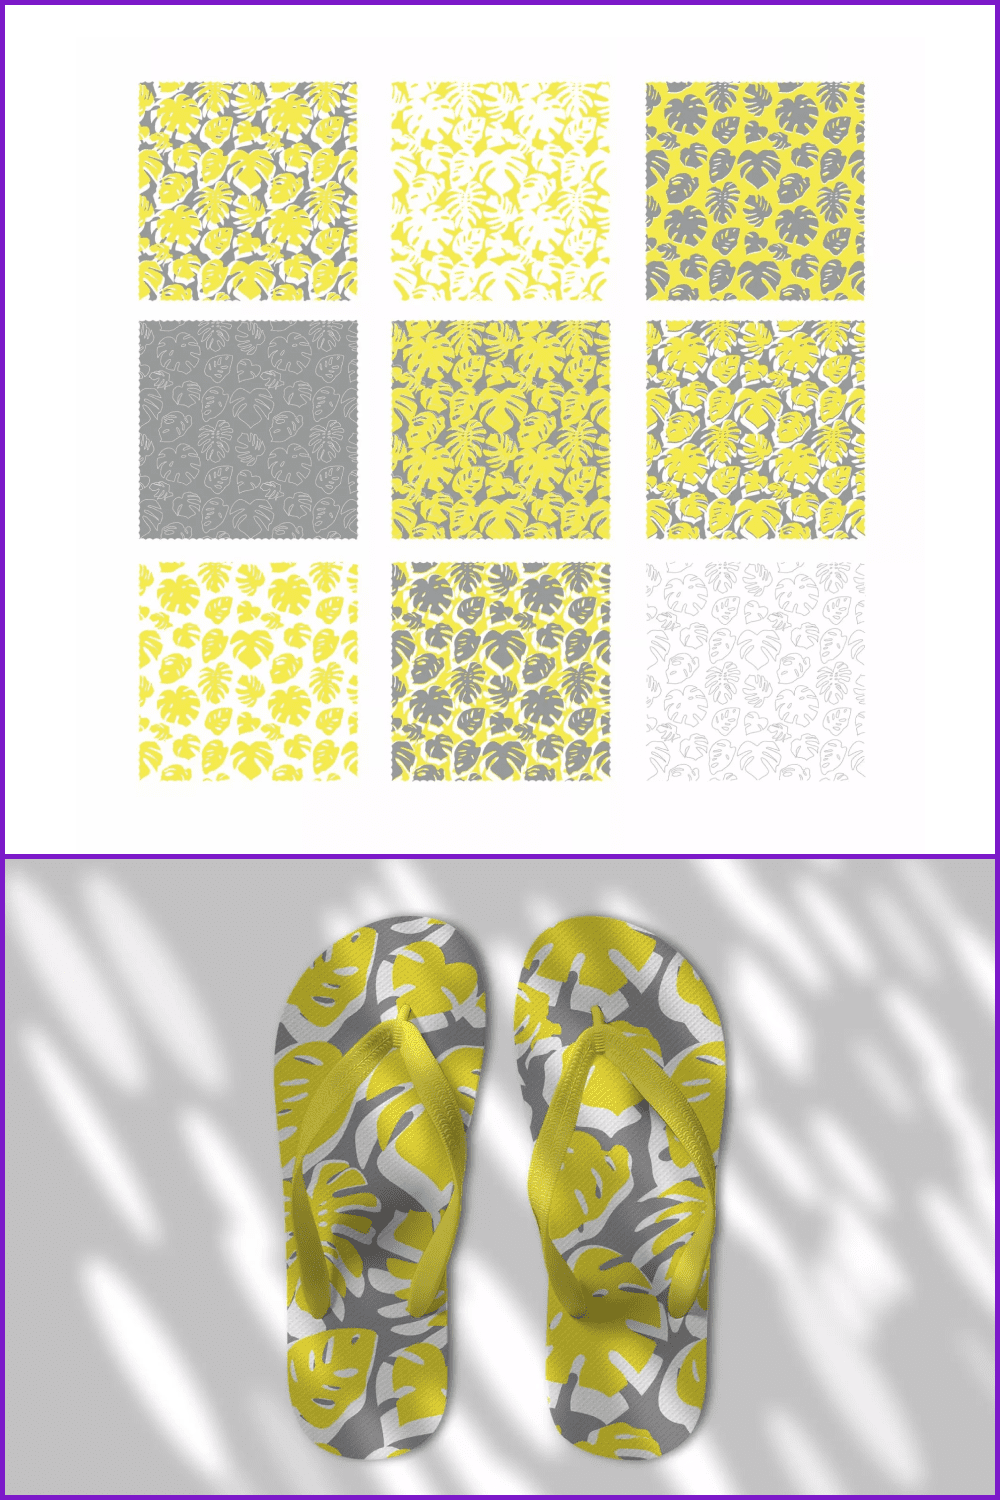 Gray, yellow, and white leaves patterns in minimalistic style.